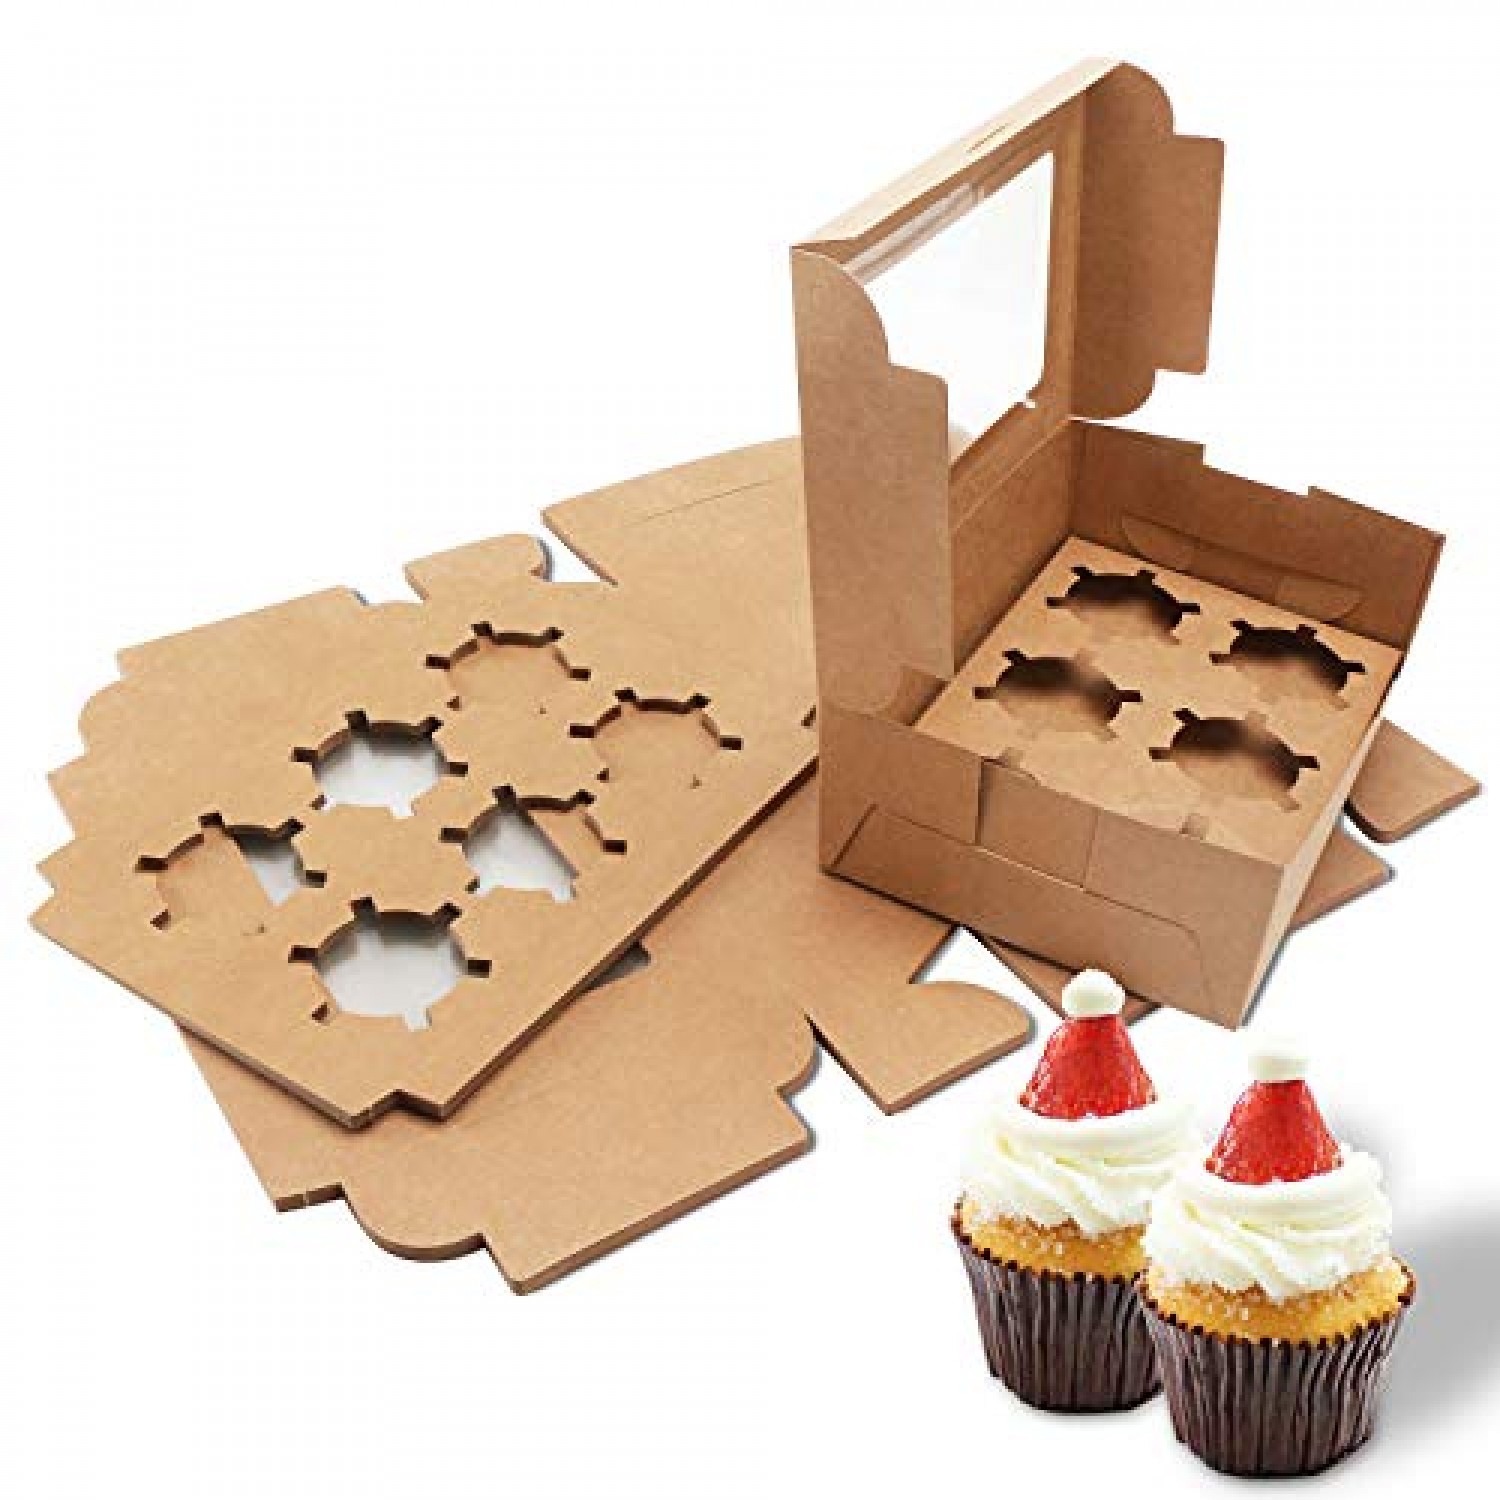 25pcs White Cupcake Boxes 4 6 Hold Cup Cakes With Removable Trays Cakes Box